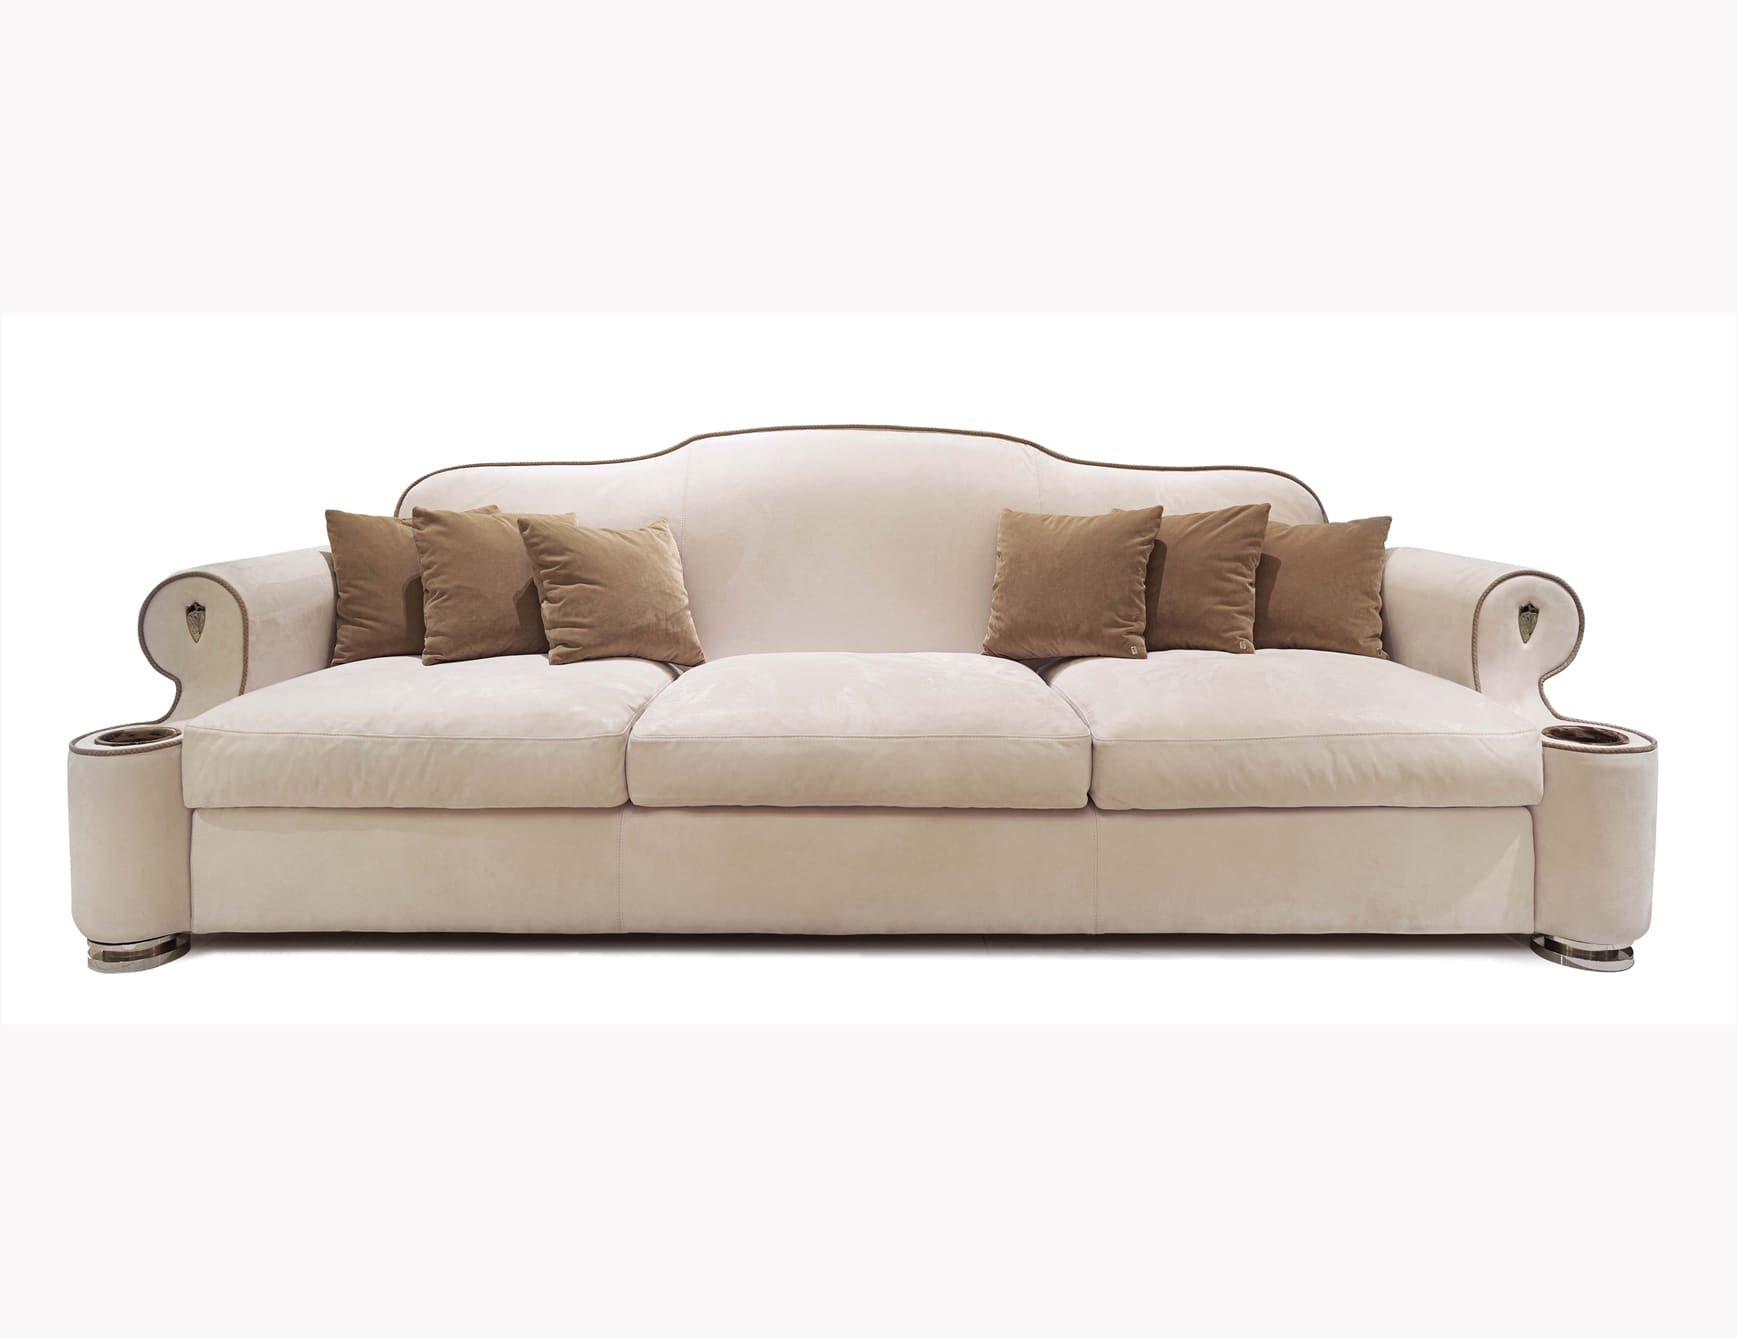 Diplomate modern luxury sofa chair with white leather